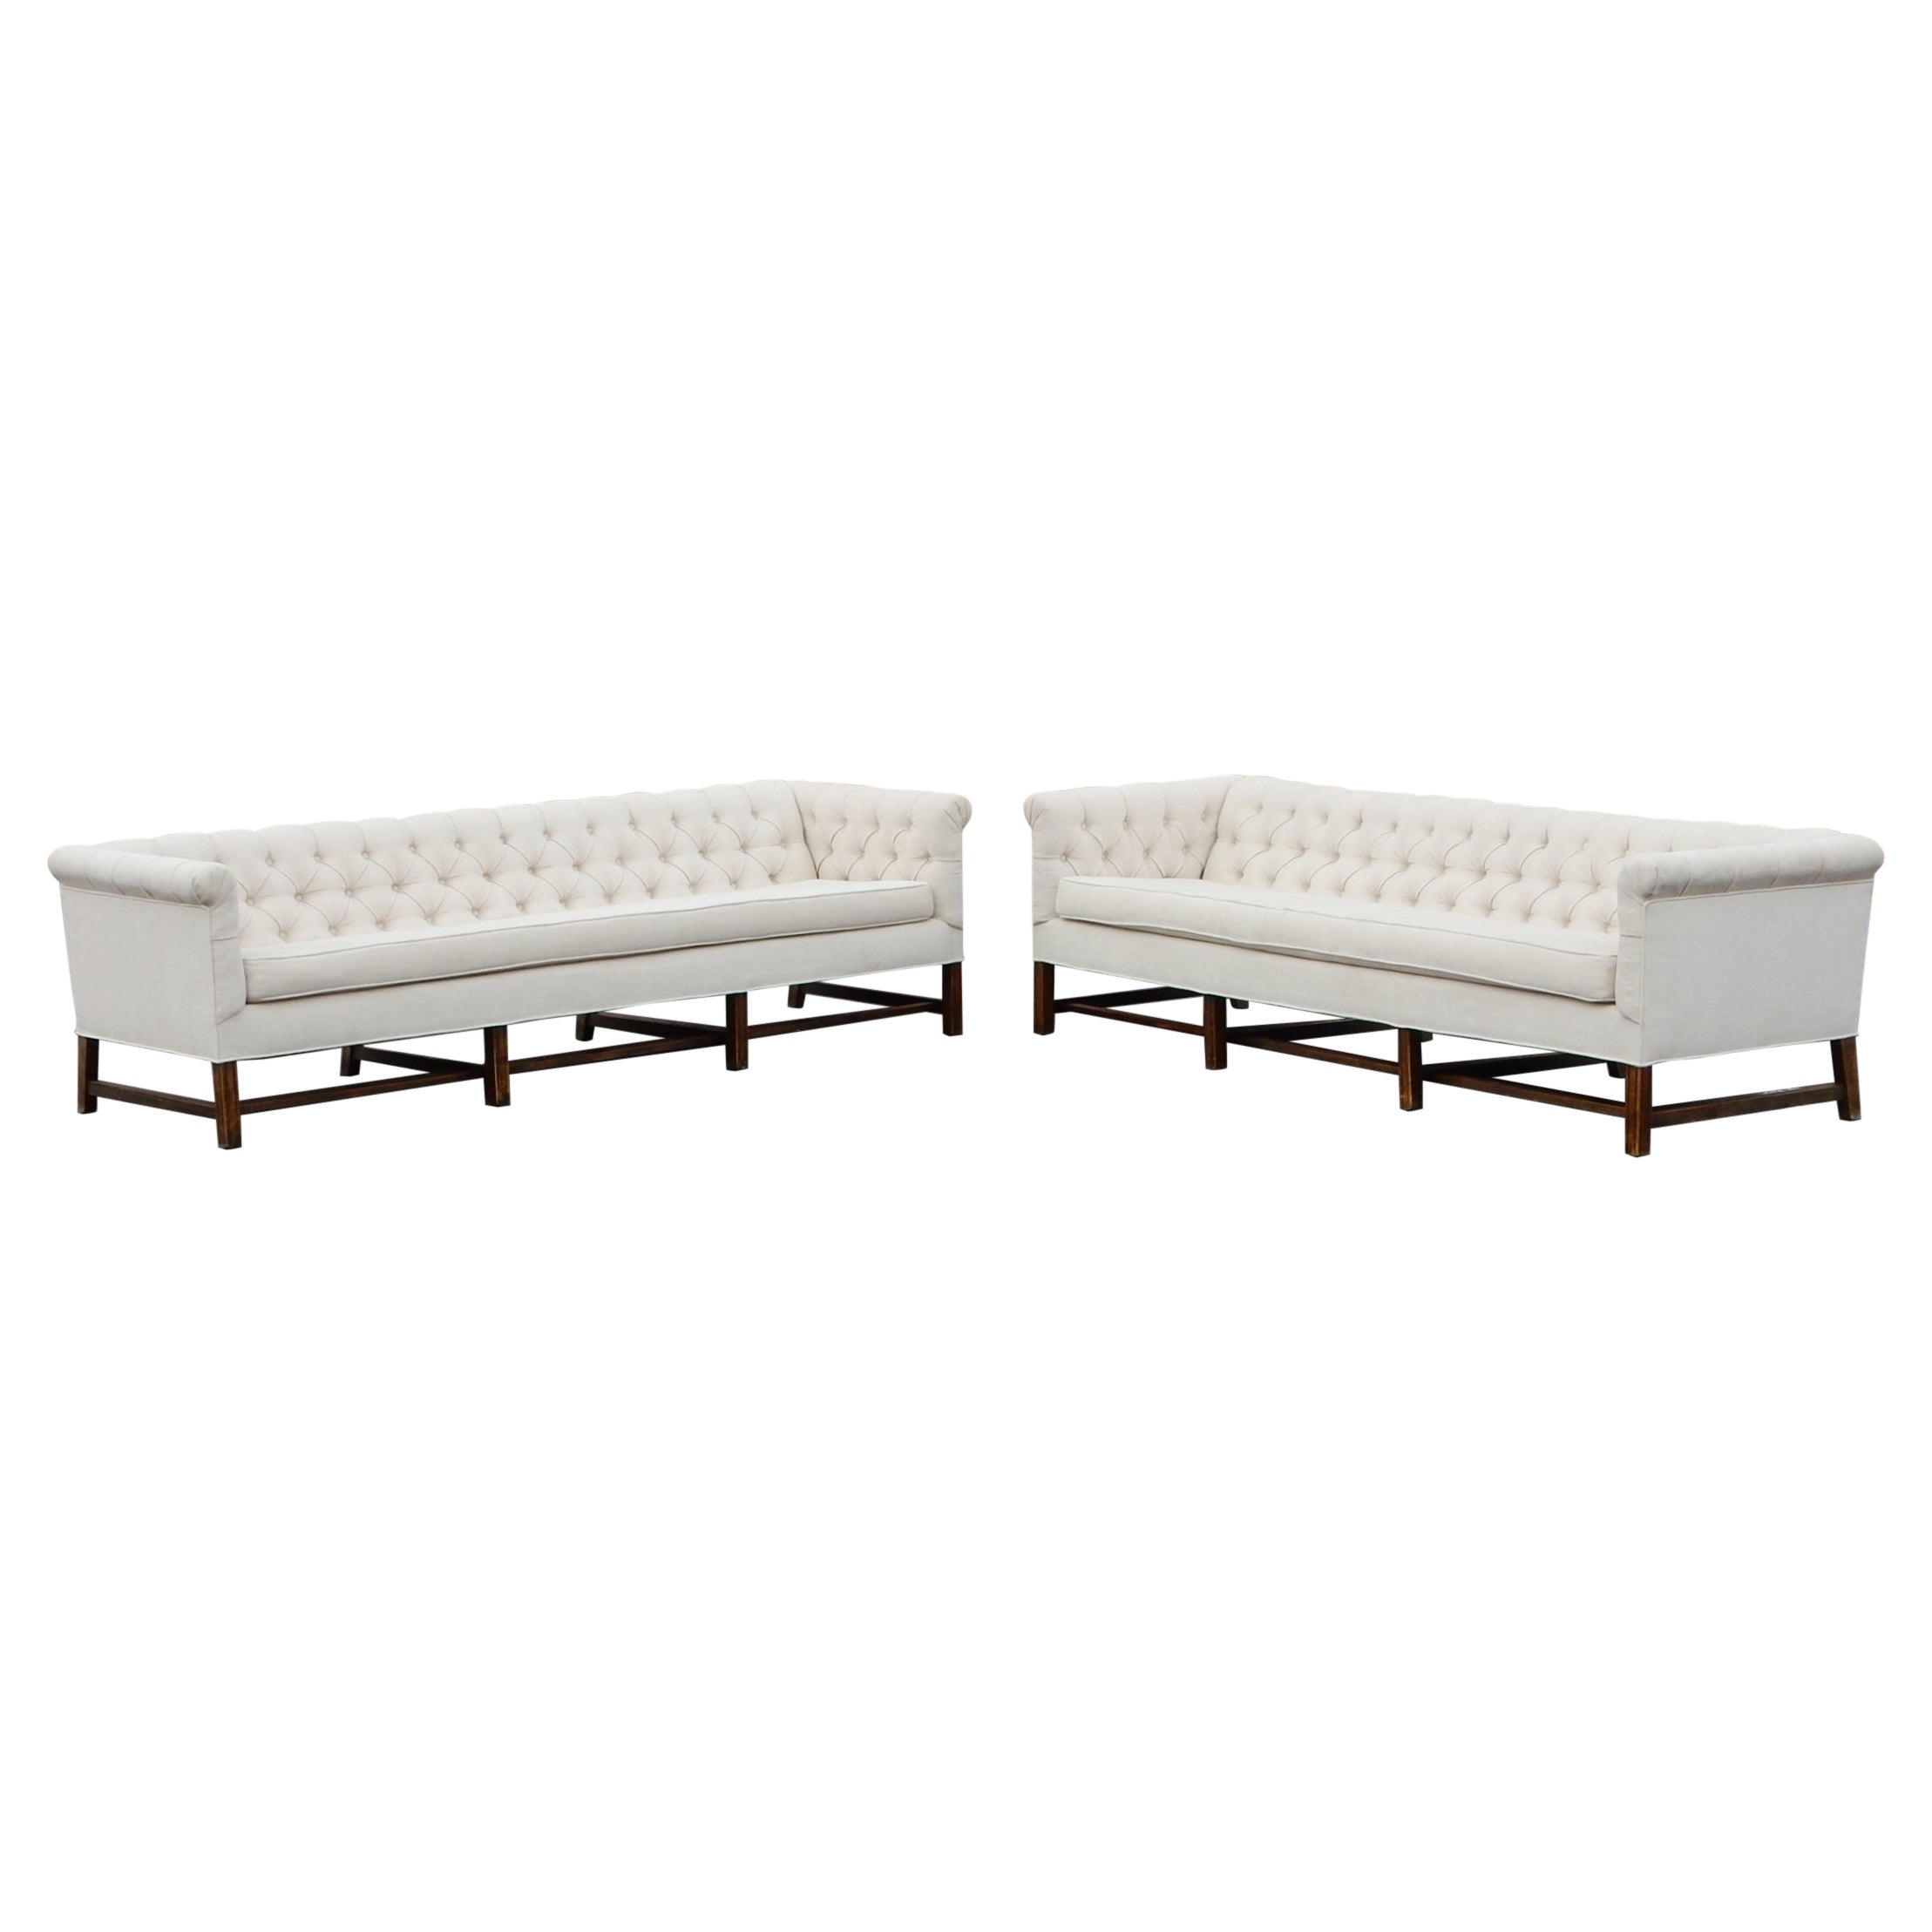 Pair of Matching Mid-Century Modern Tufted Tuxedo Sofas For Sale